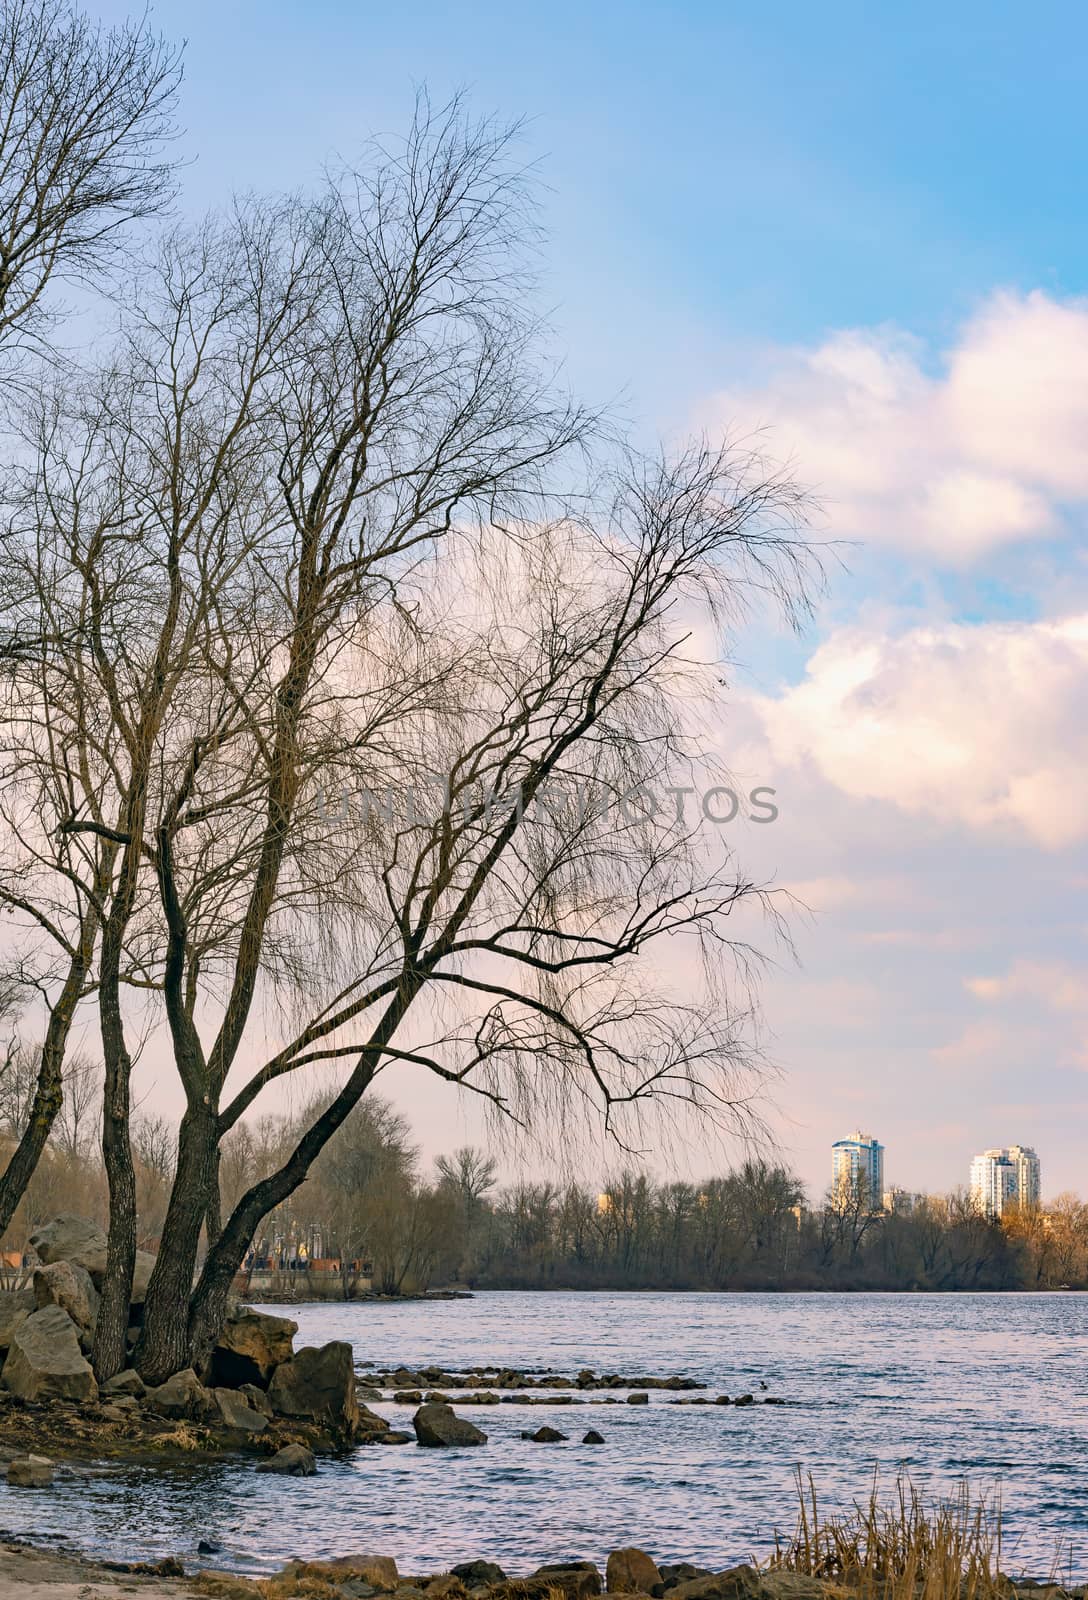 View of  poplars close to the blue Dnieper River in Kiev at the beginning of spring. High buildings in the background.